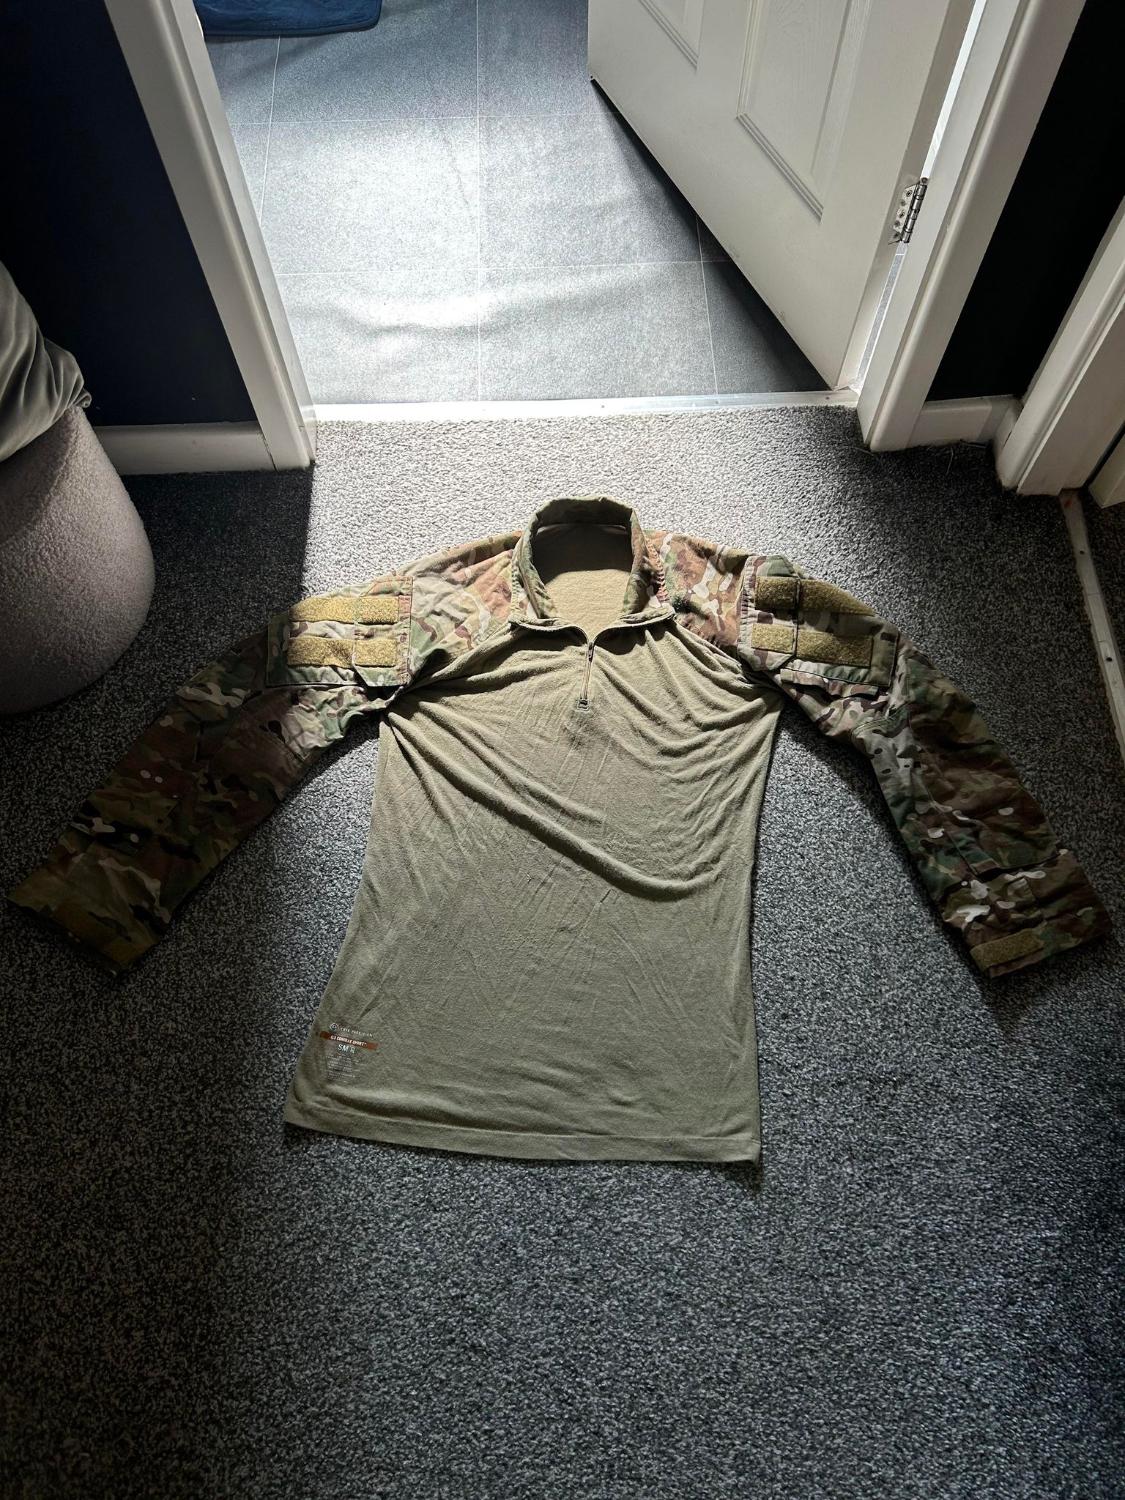 Genuine crye Precision Shirt-Price Reduction!! - Gear - Airsoft Forums UK